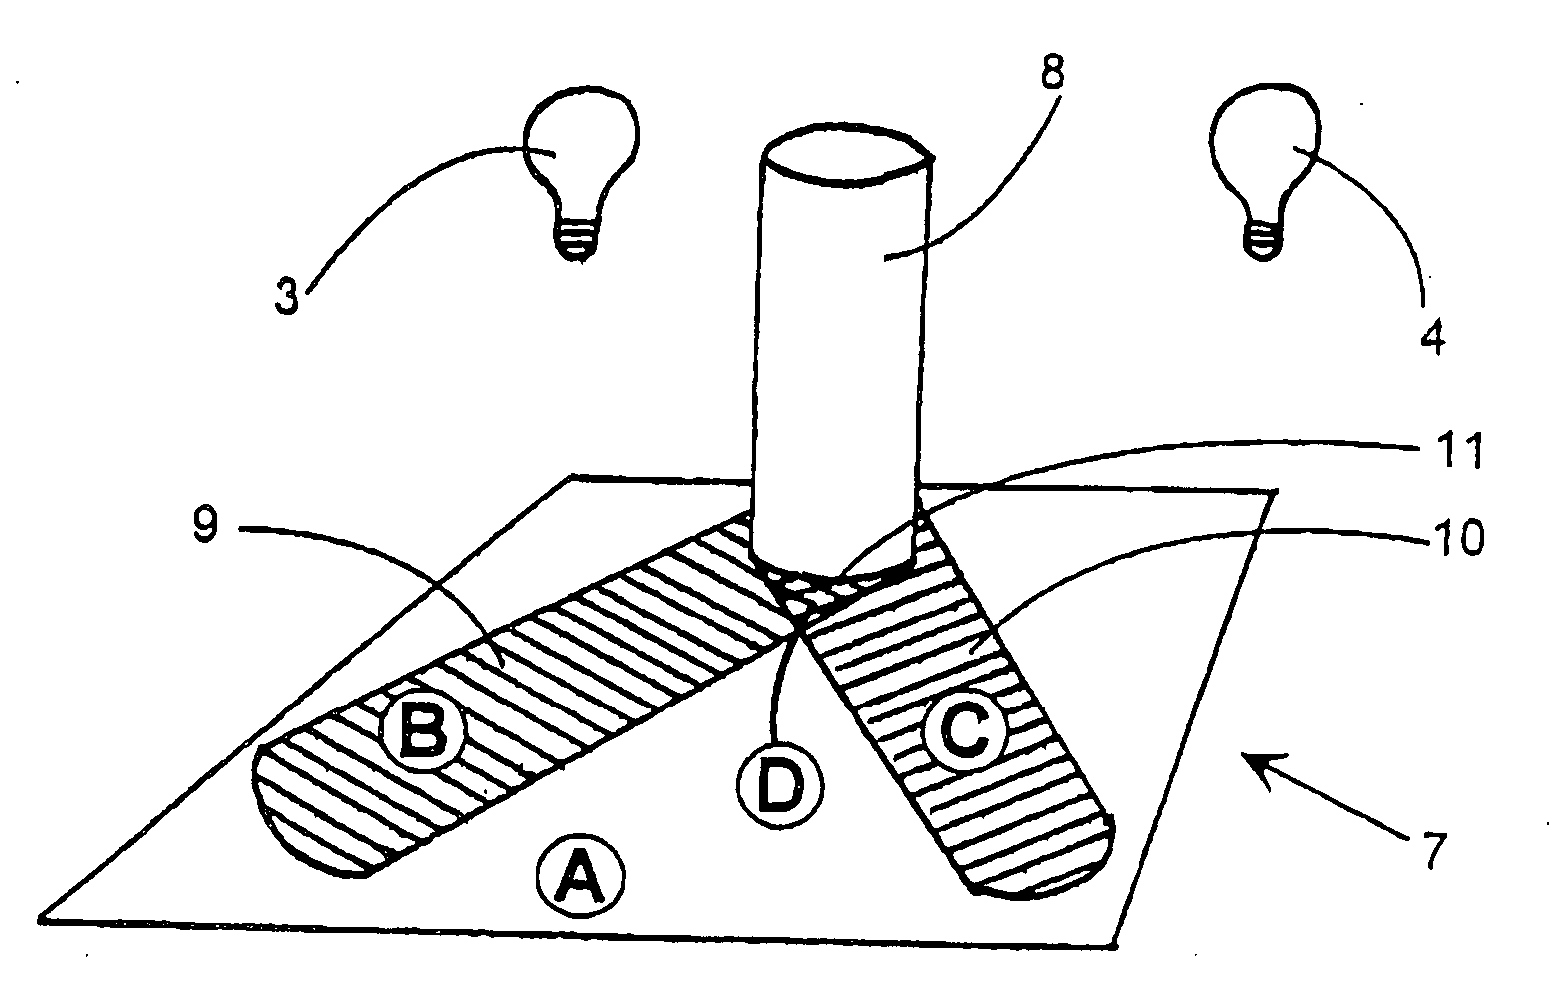 Method and device for compensating for shadows in digital images